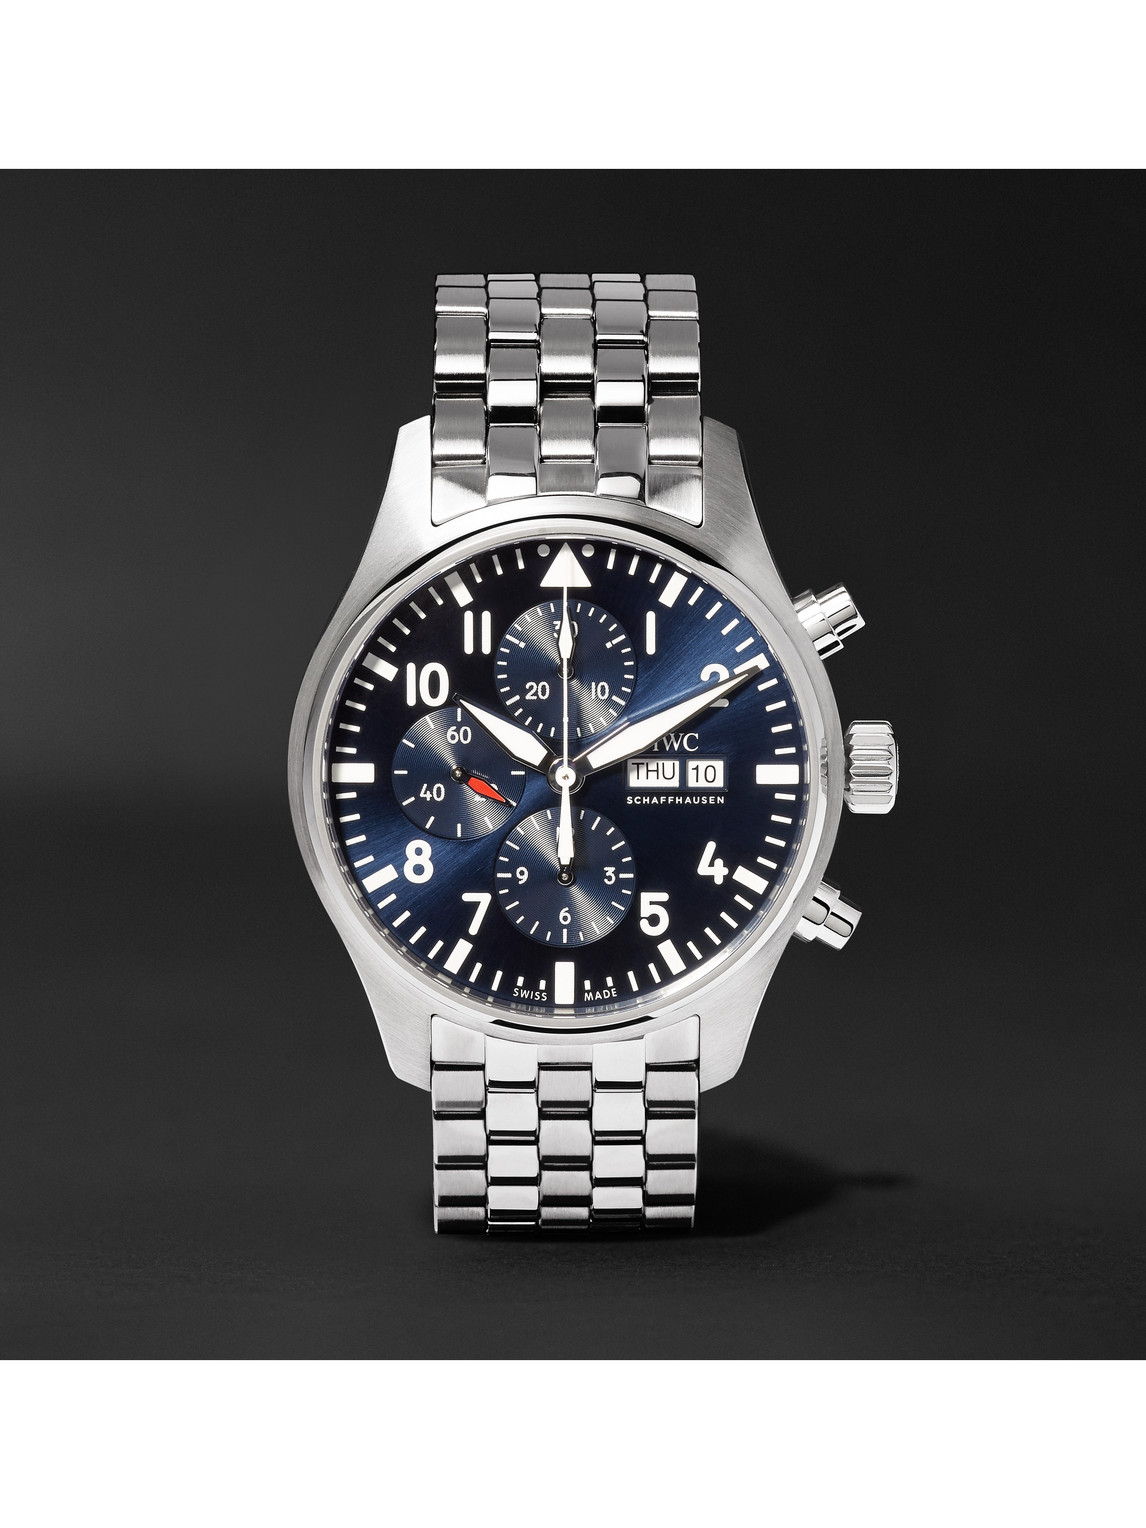 Iwc Schaffhausen Pilot's Le Petit Prince Edition Chronograph 43mm Stainless Steel Watch, Ref. No. Iw377717 In Blue